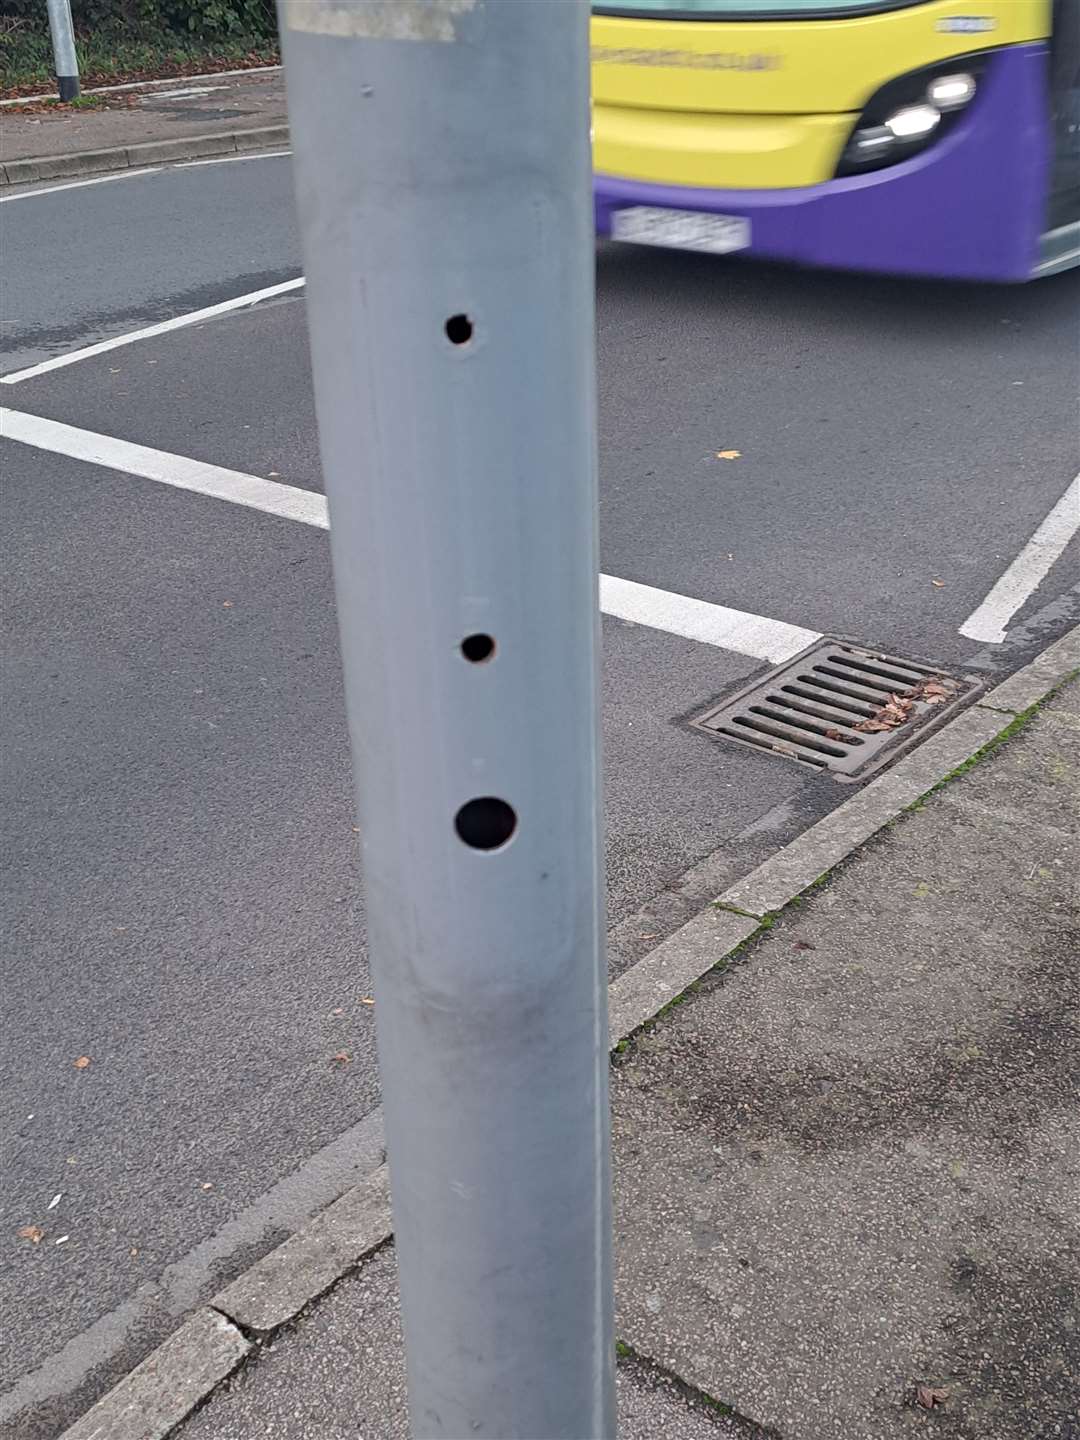 The crossing post without its control box